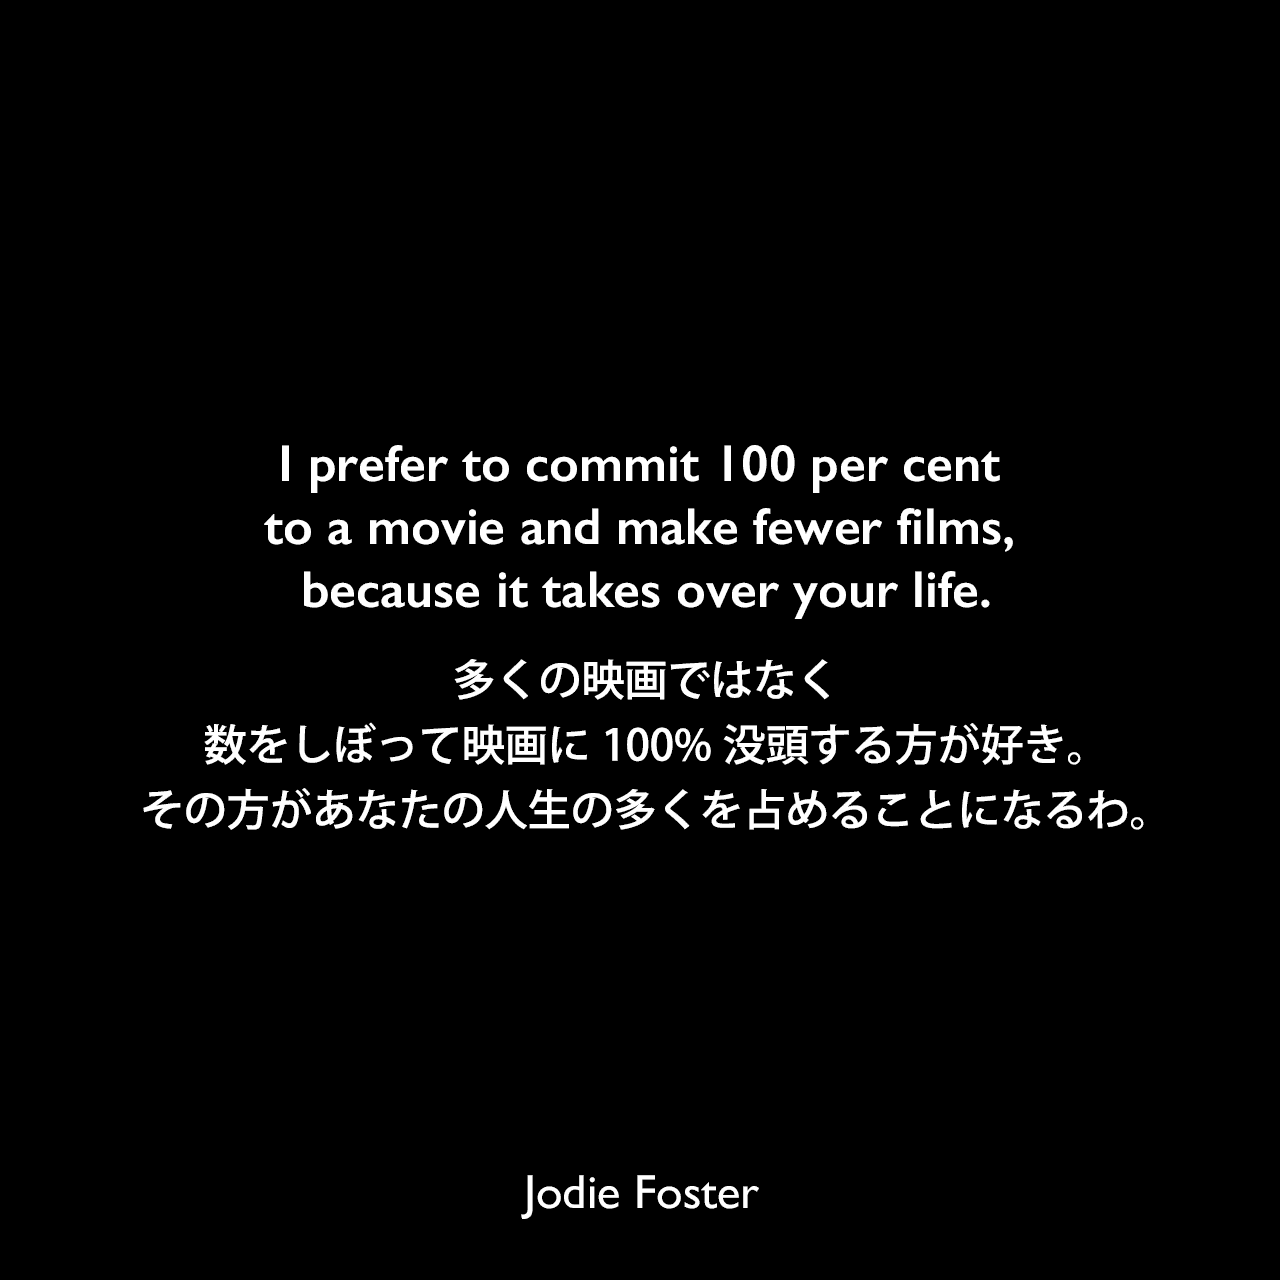 I prefer to commit 100 per cent to a movie and make fewer films, because it takes over your life.多くの映画ではなく、数をしぼって映画に100%没頭する方が好き。その方があなたの人生の多くを占めることになるわ。Jodie Foster